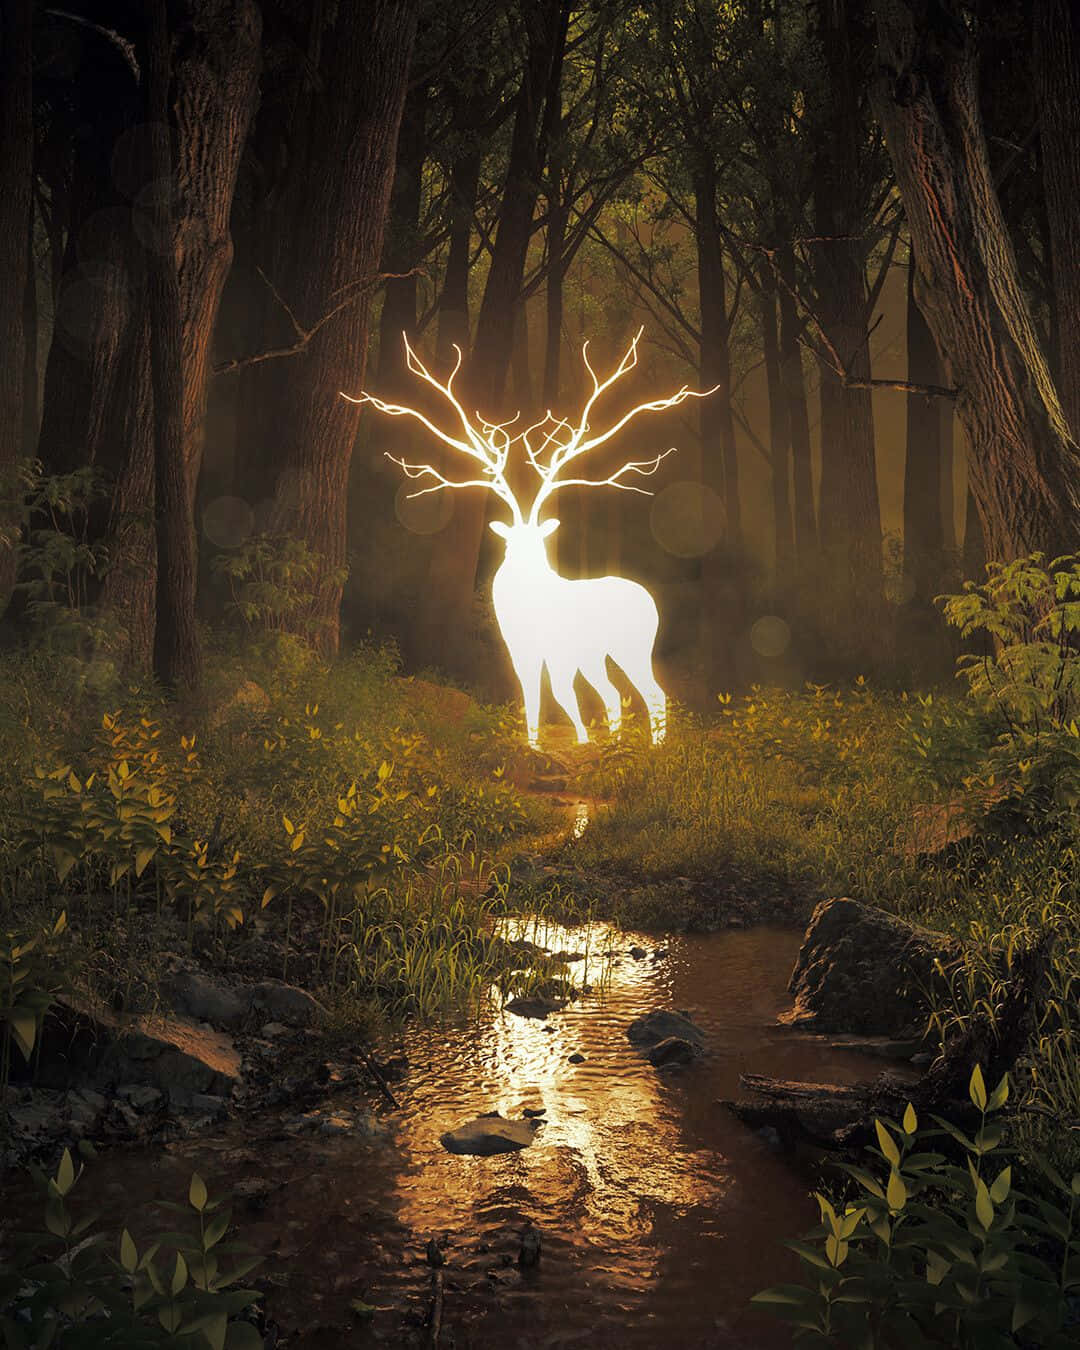 Take a break from everyday life and watch a cool deer hangin' around in nature Wallpaper